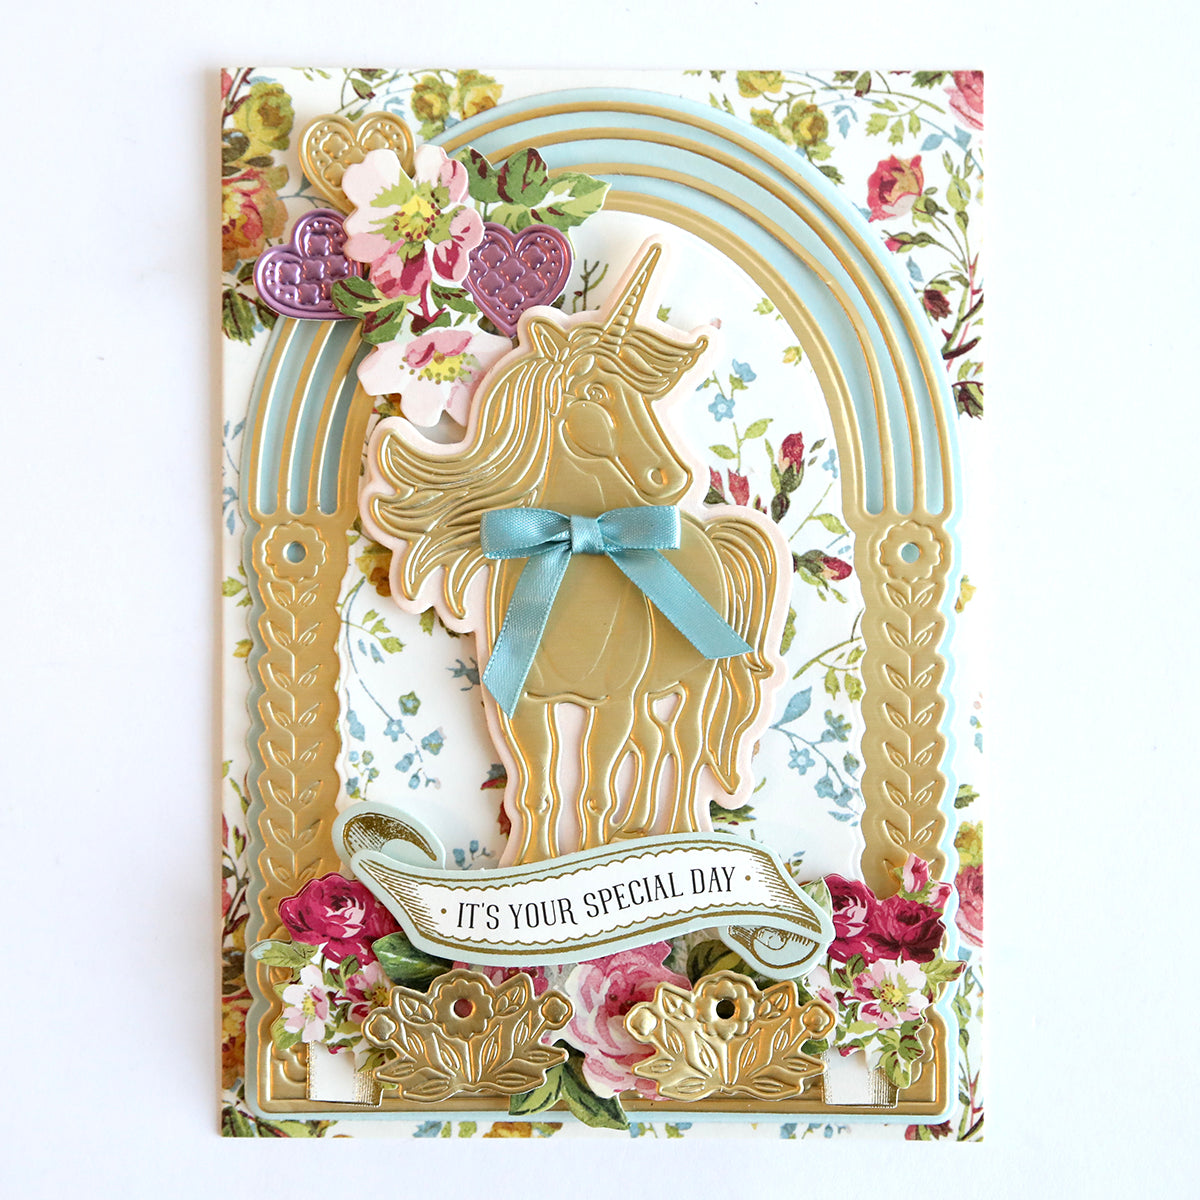 A decorative greeting card crafted with the 3D Unicorn Scene Dies, featuring floral patterns and a message saying "it's your special day.